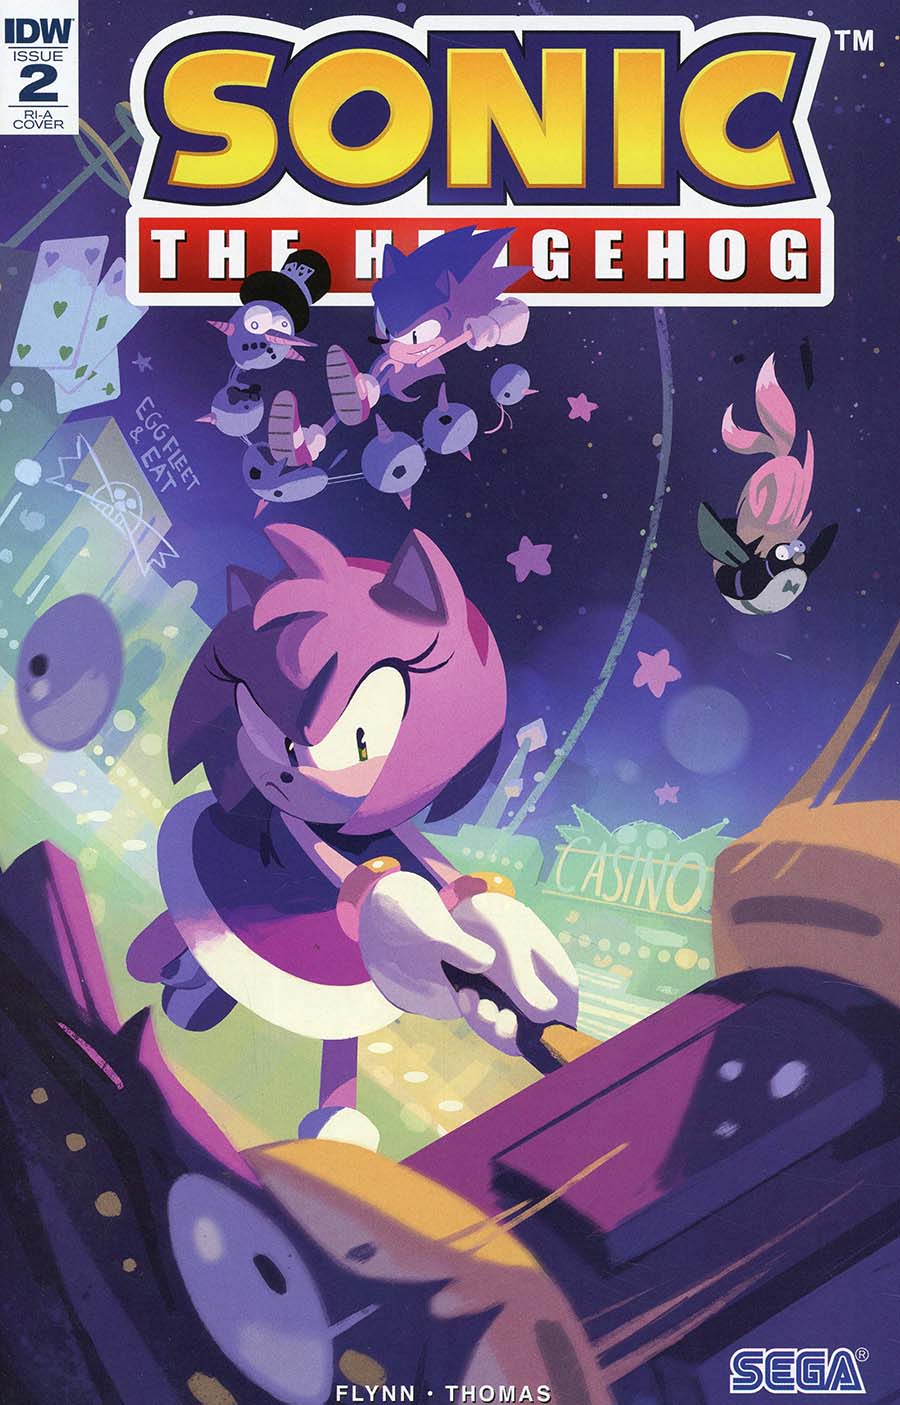 Sonic The Hedgehog Vol 3 #2 Cover C Incentive Nathalie Fourdraine Variant Cover